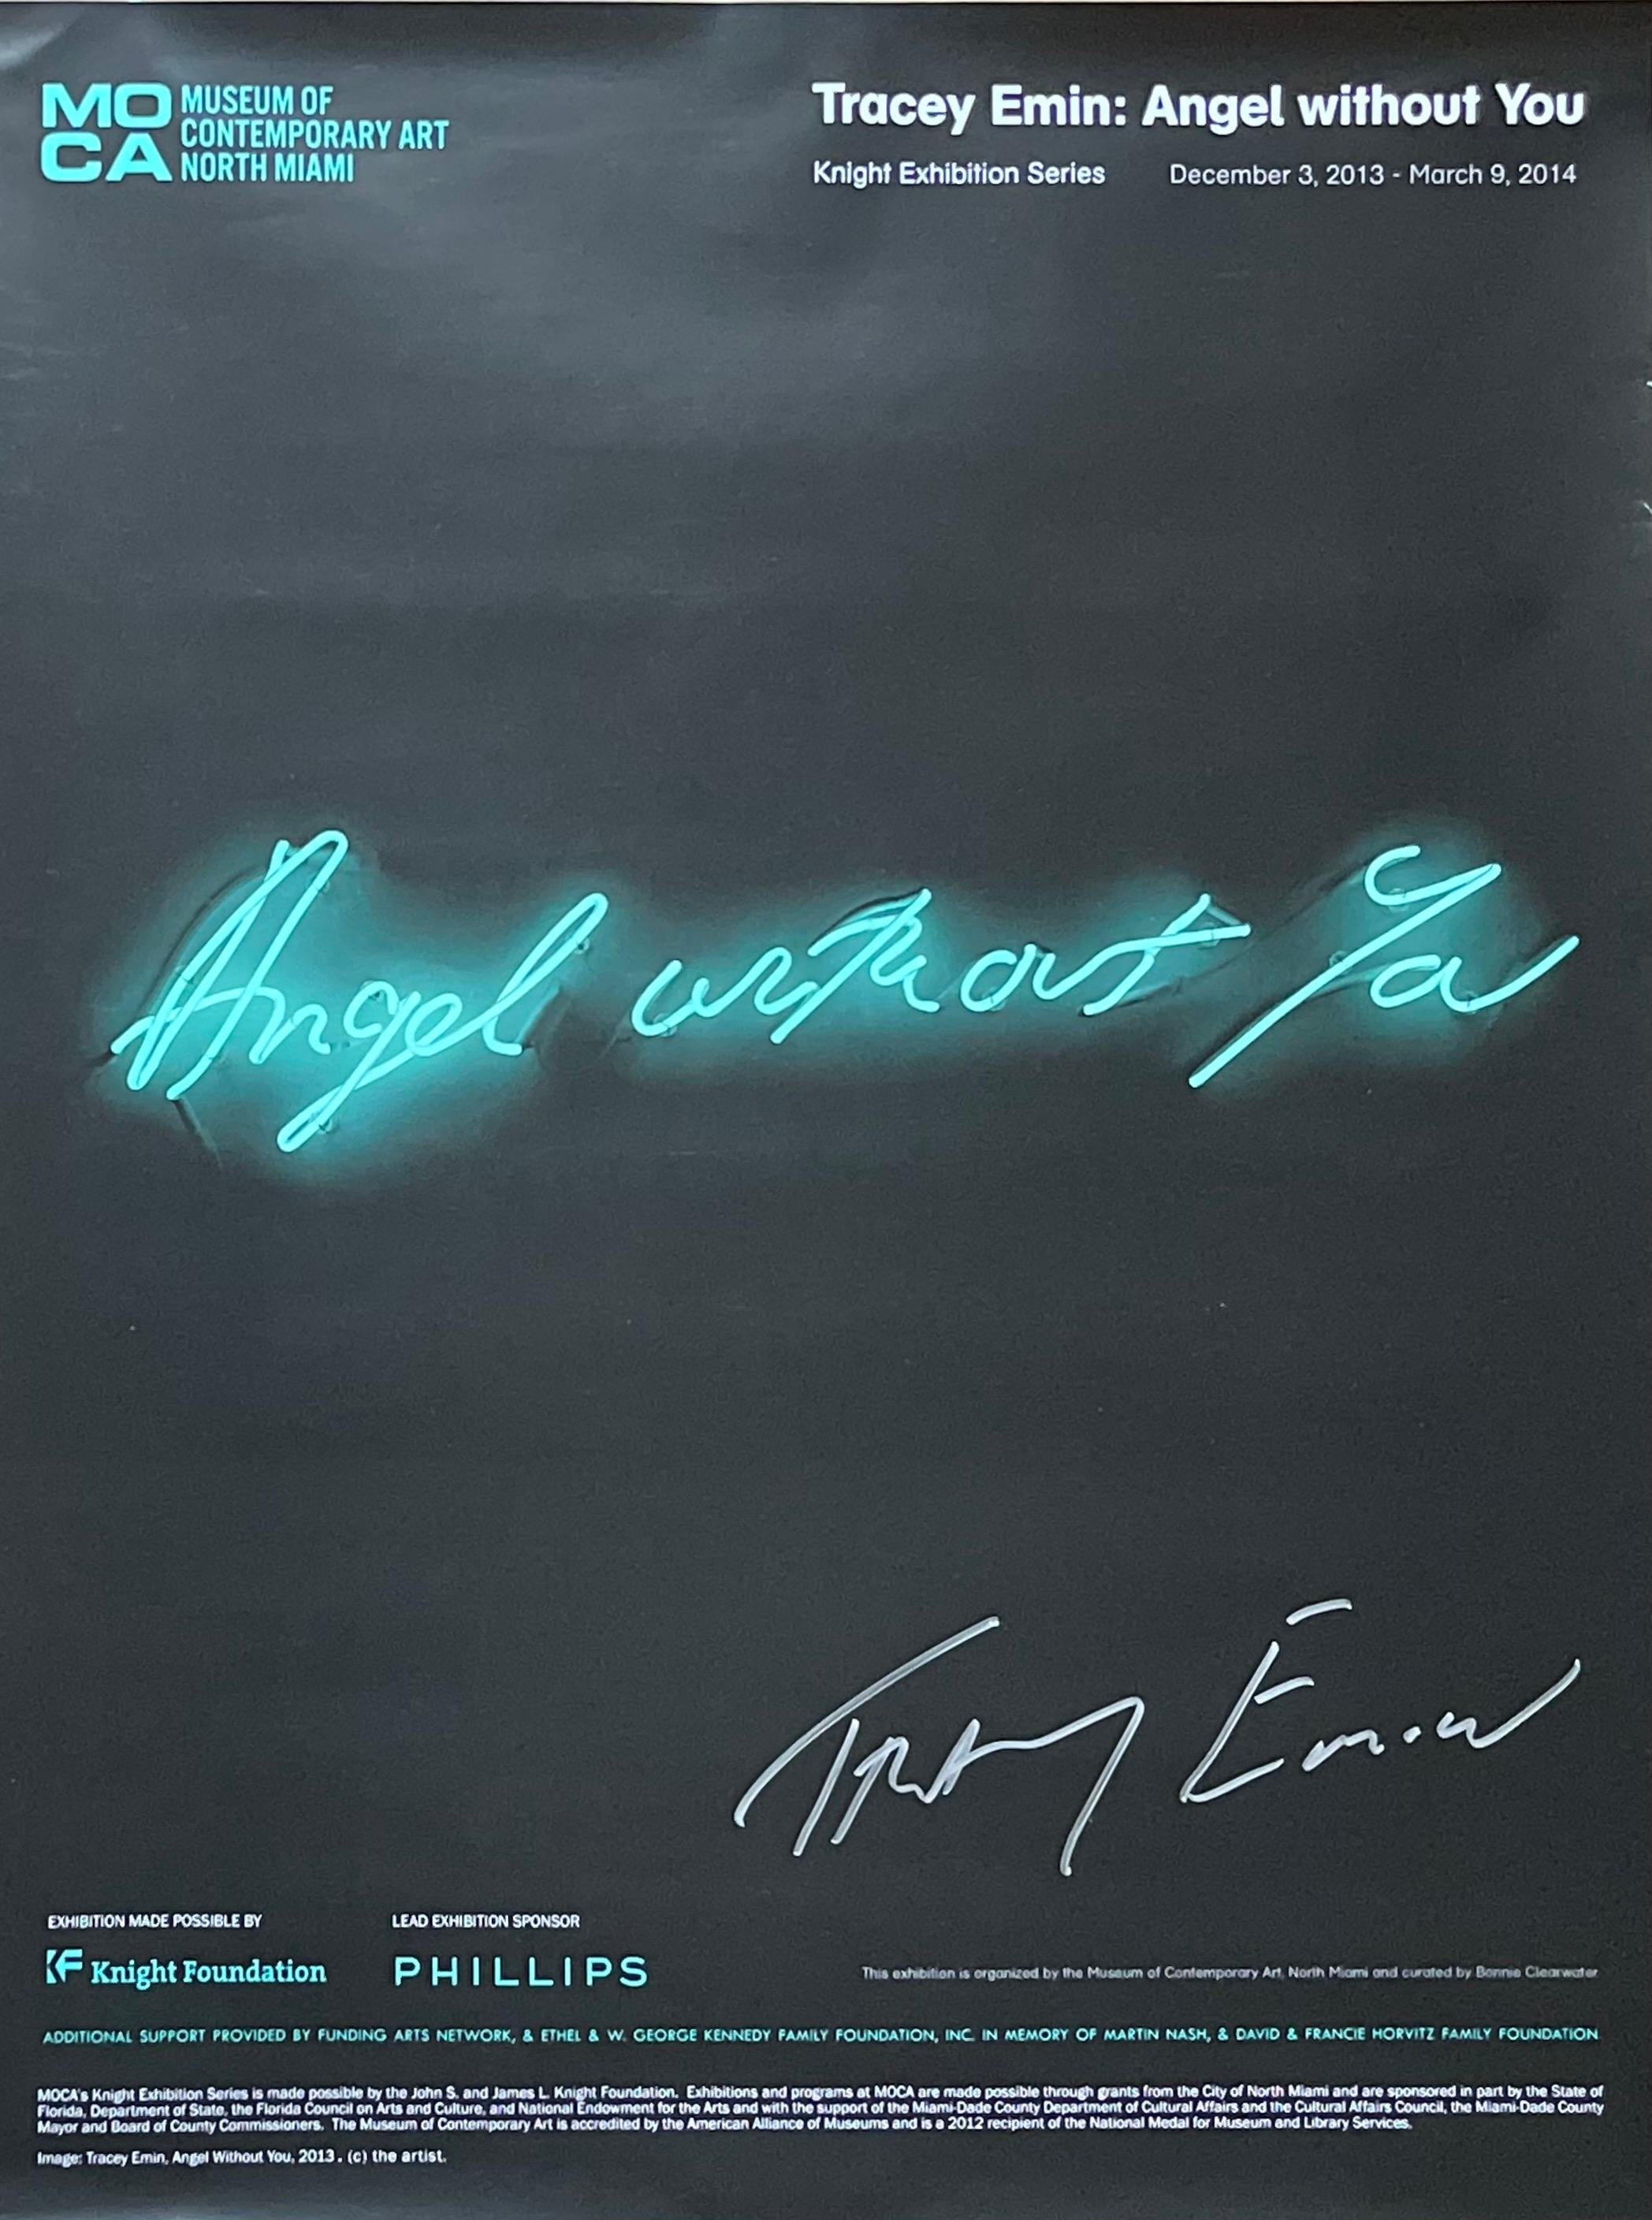 Tracey Emin Museum of Contemporary Art Miami Poster (Hand Signed by Tracey)